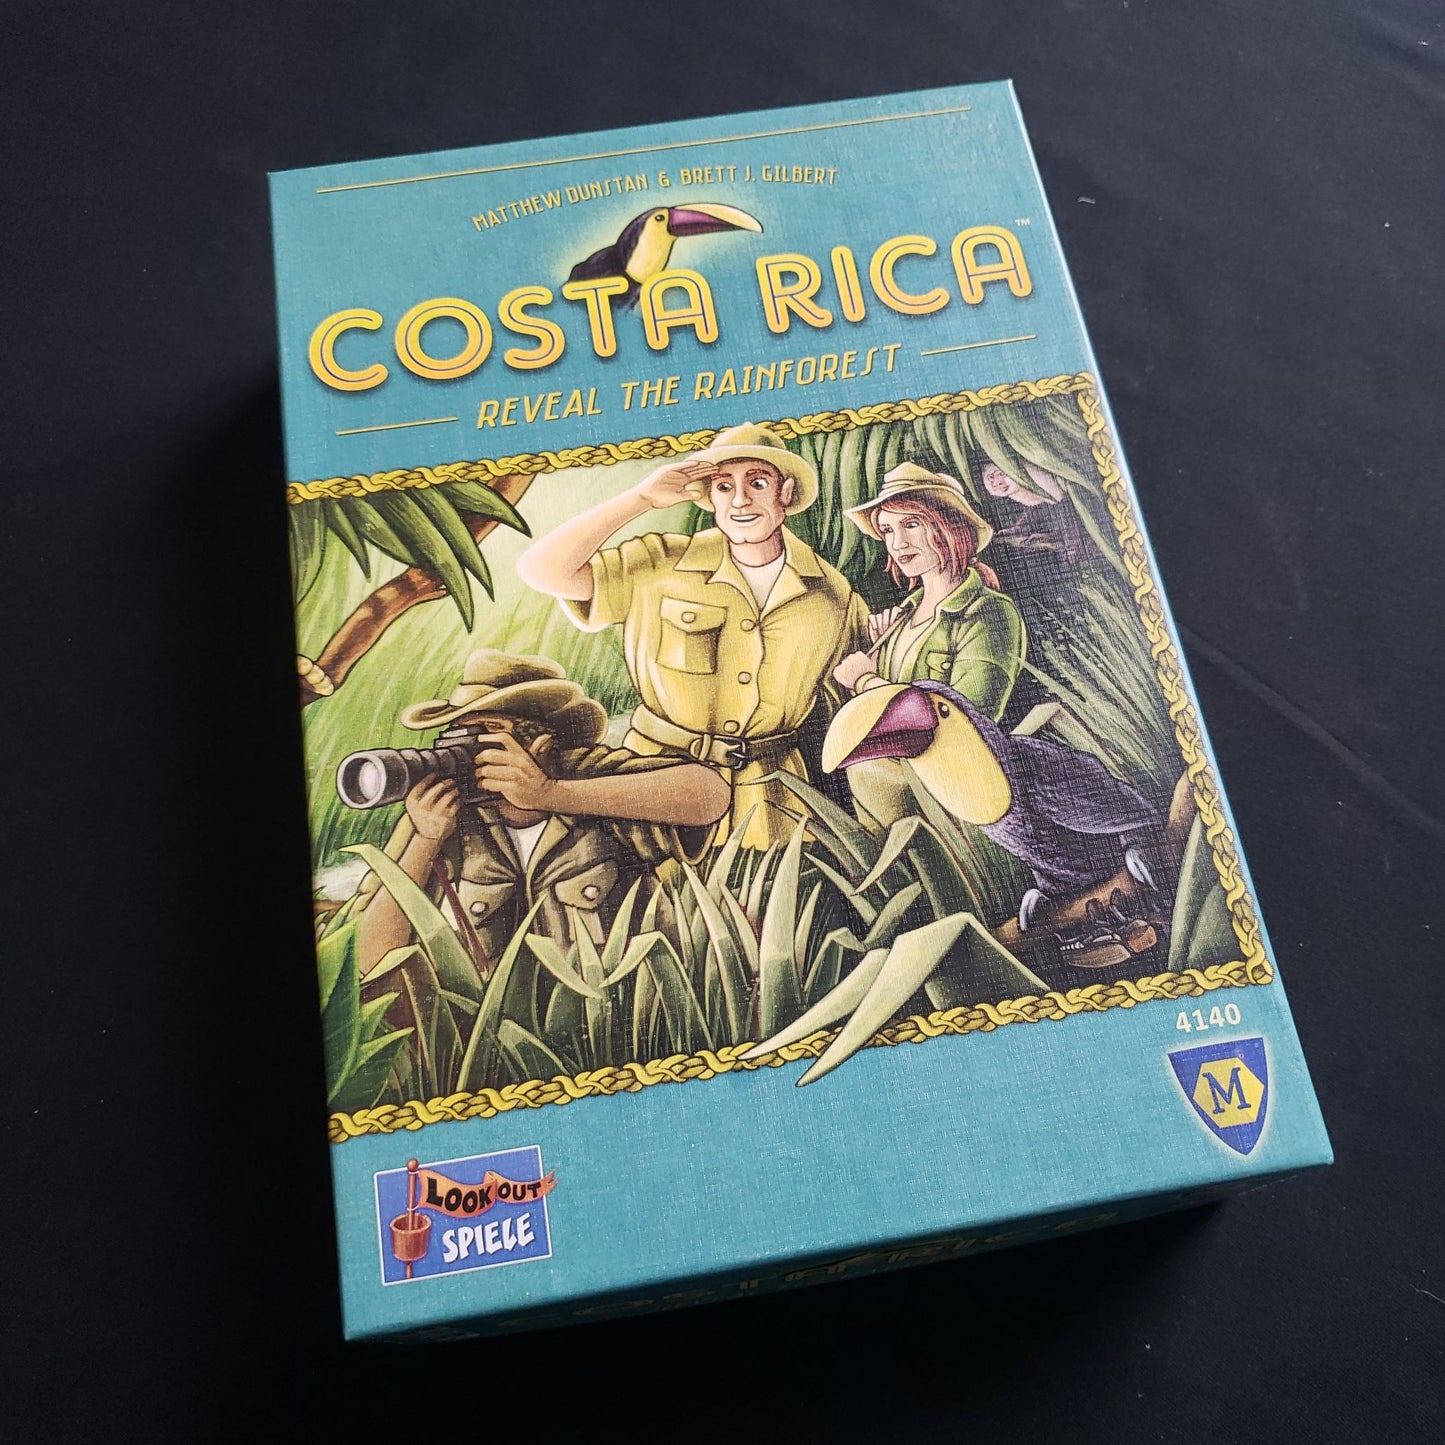 Image shows the front cover of the box of the Costa Rica board game